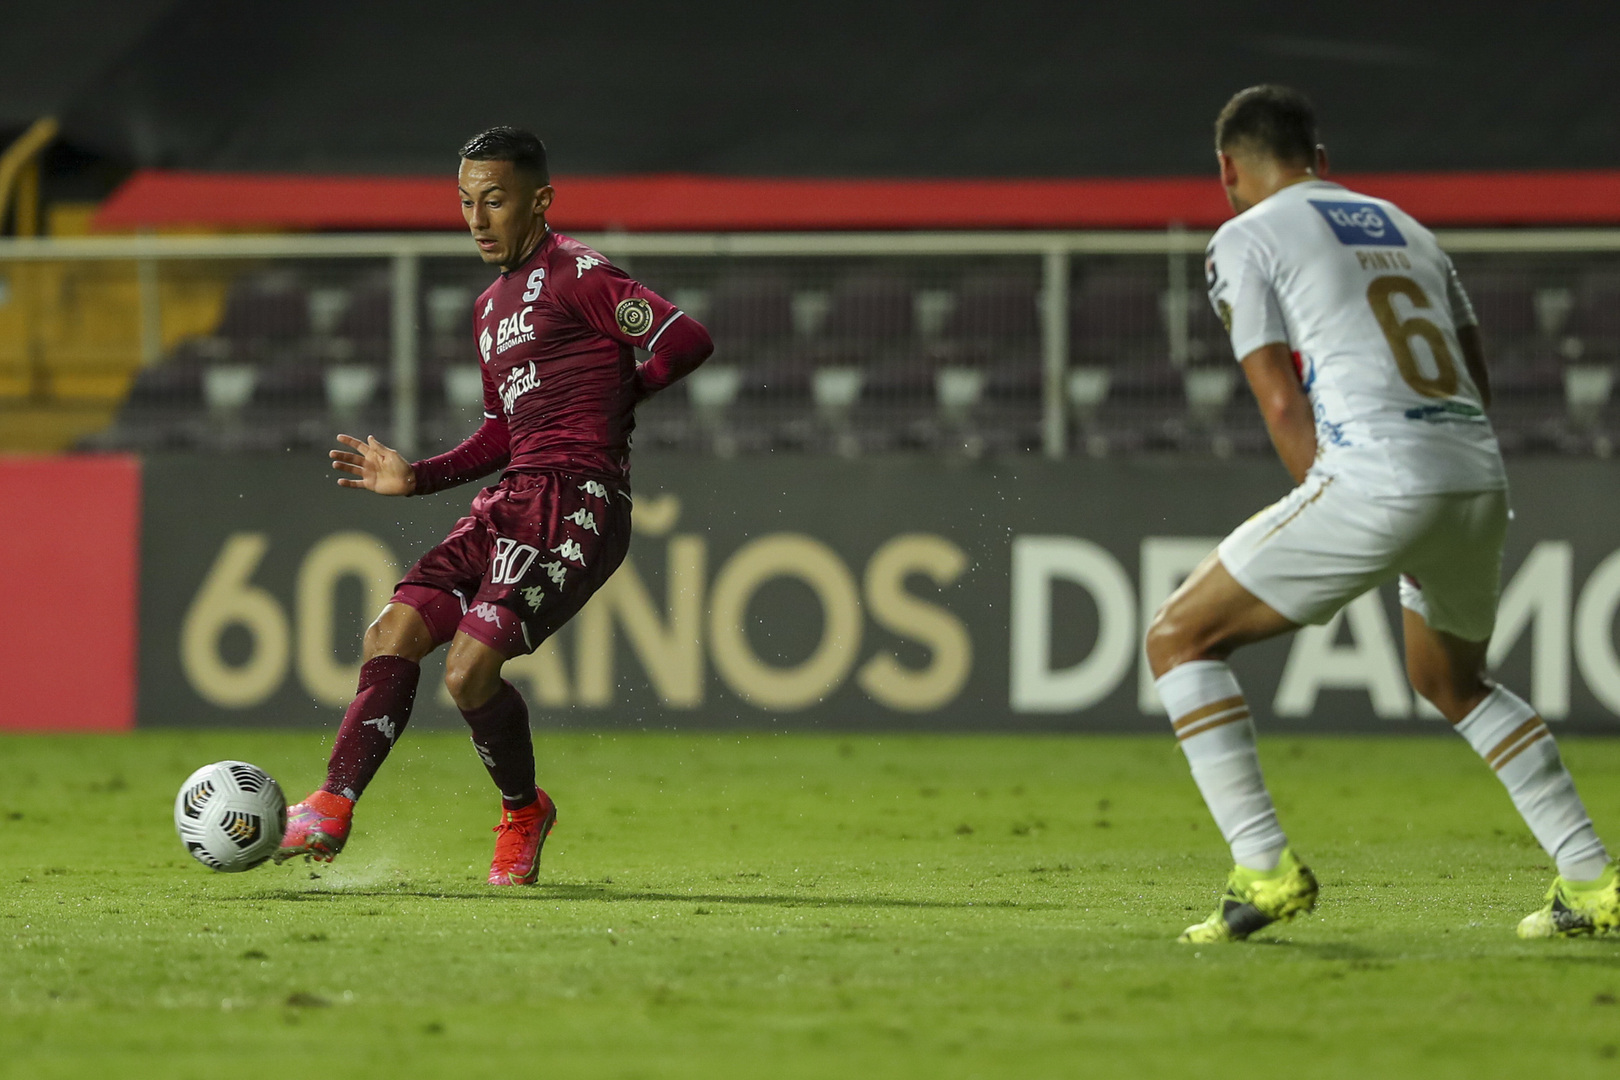 Saprissa rally from early deficit to top Comunicaciones